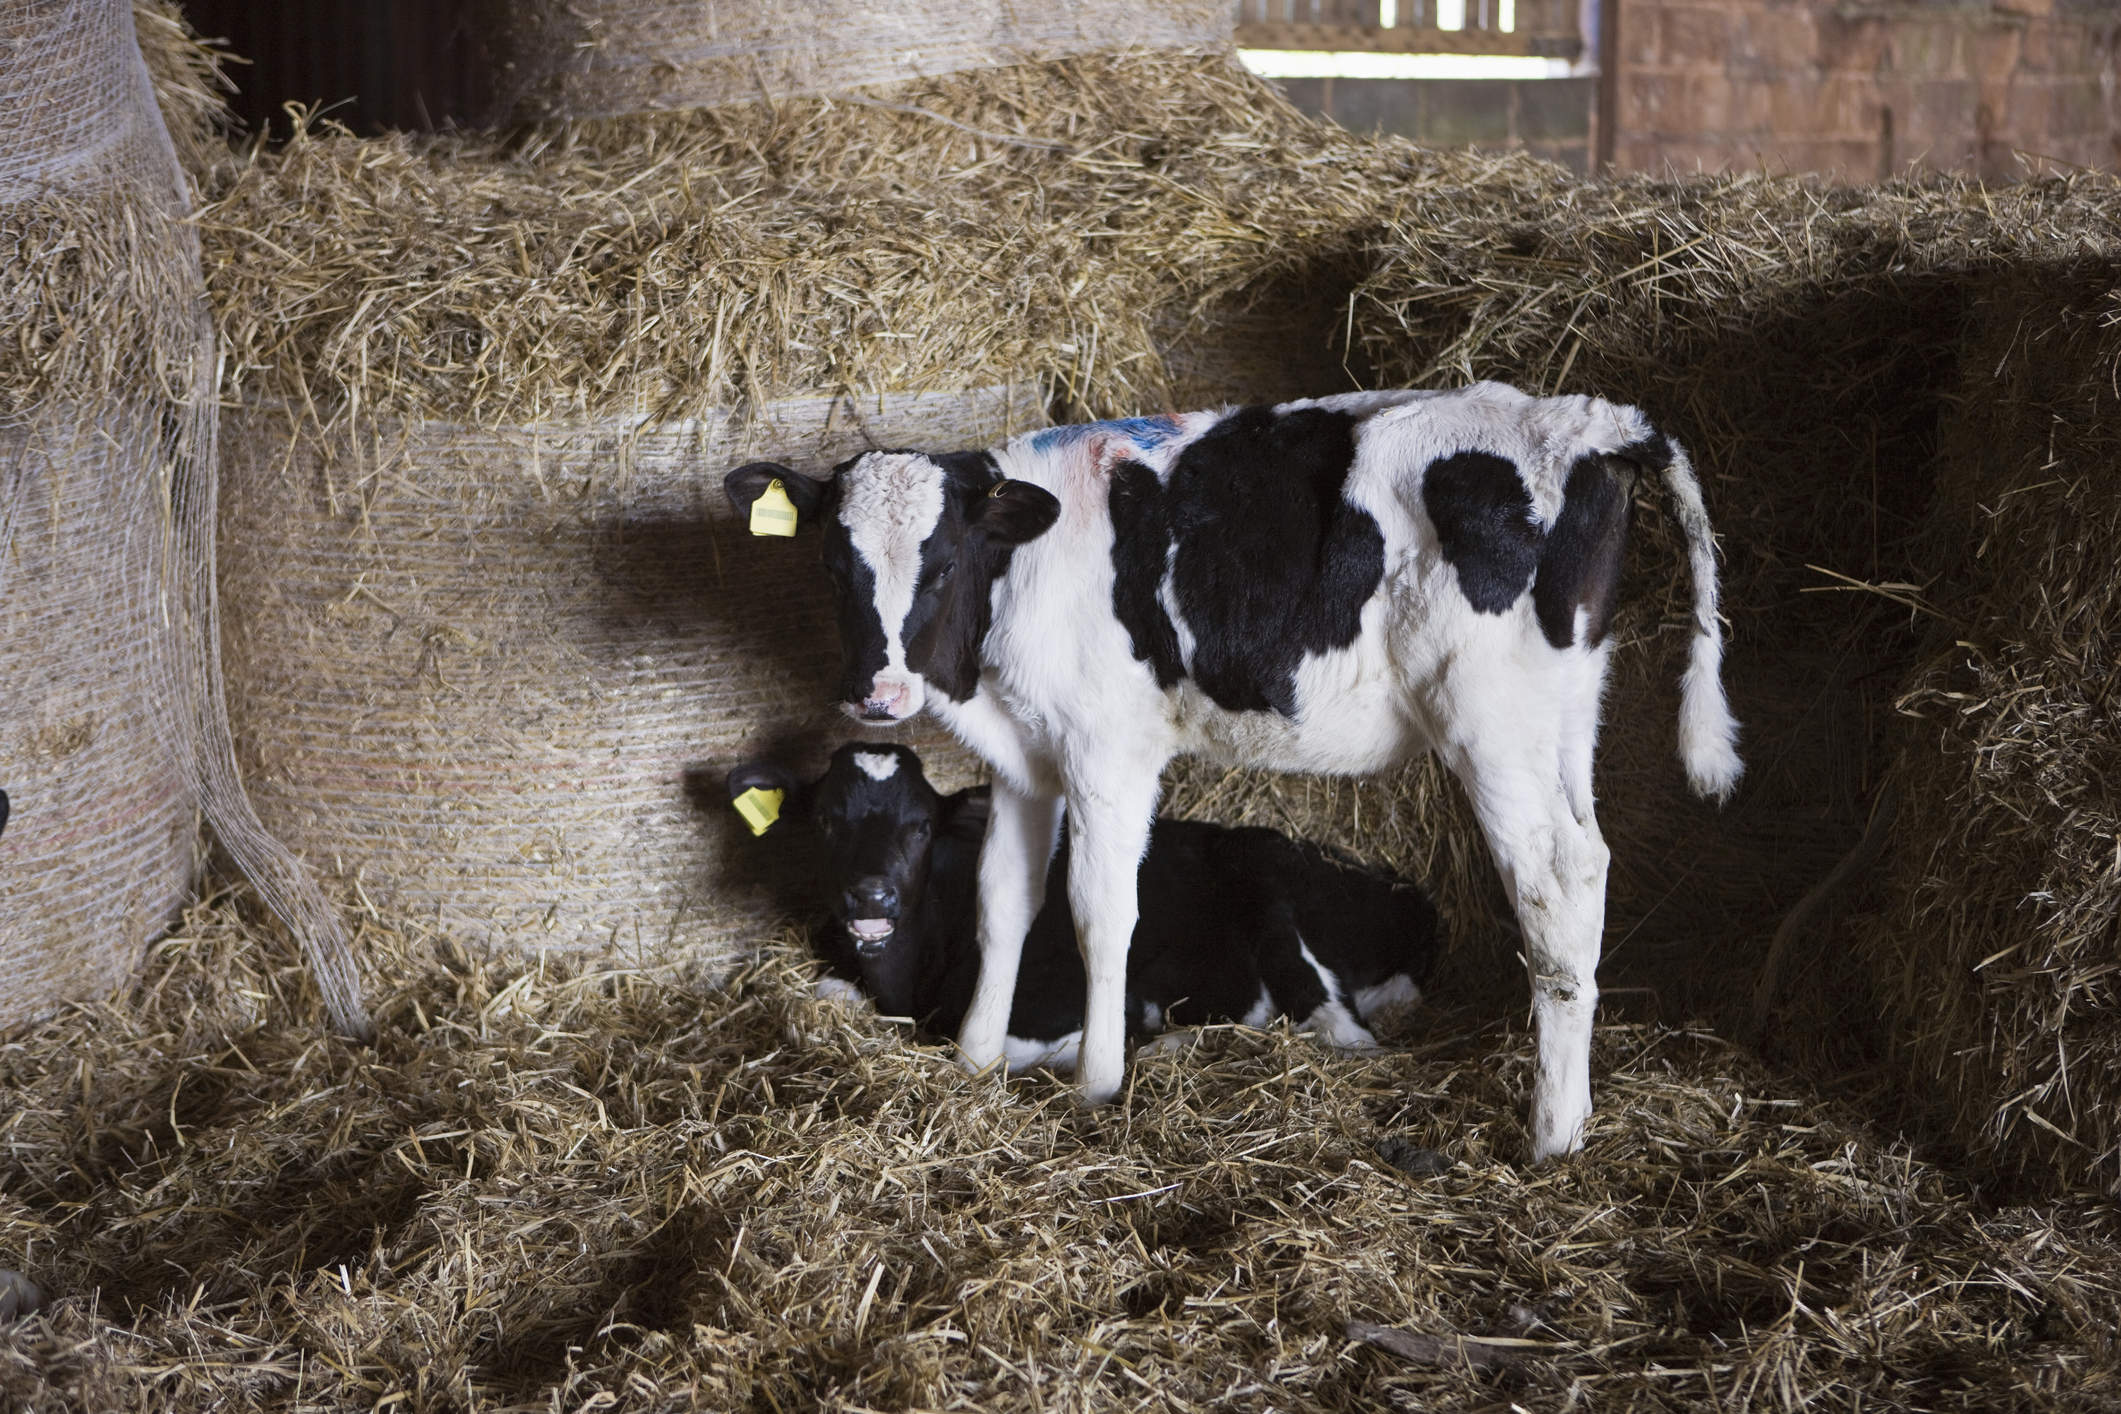 Two dairy calves in a barn with straw.